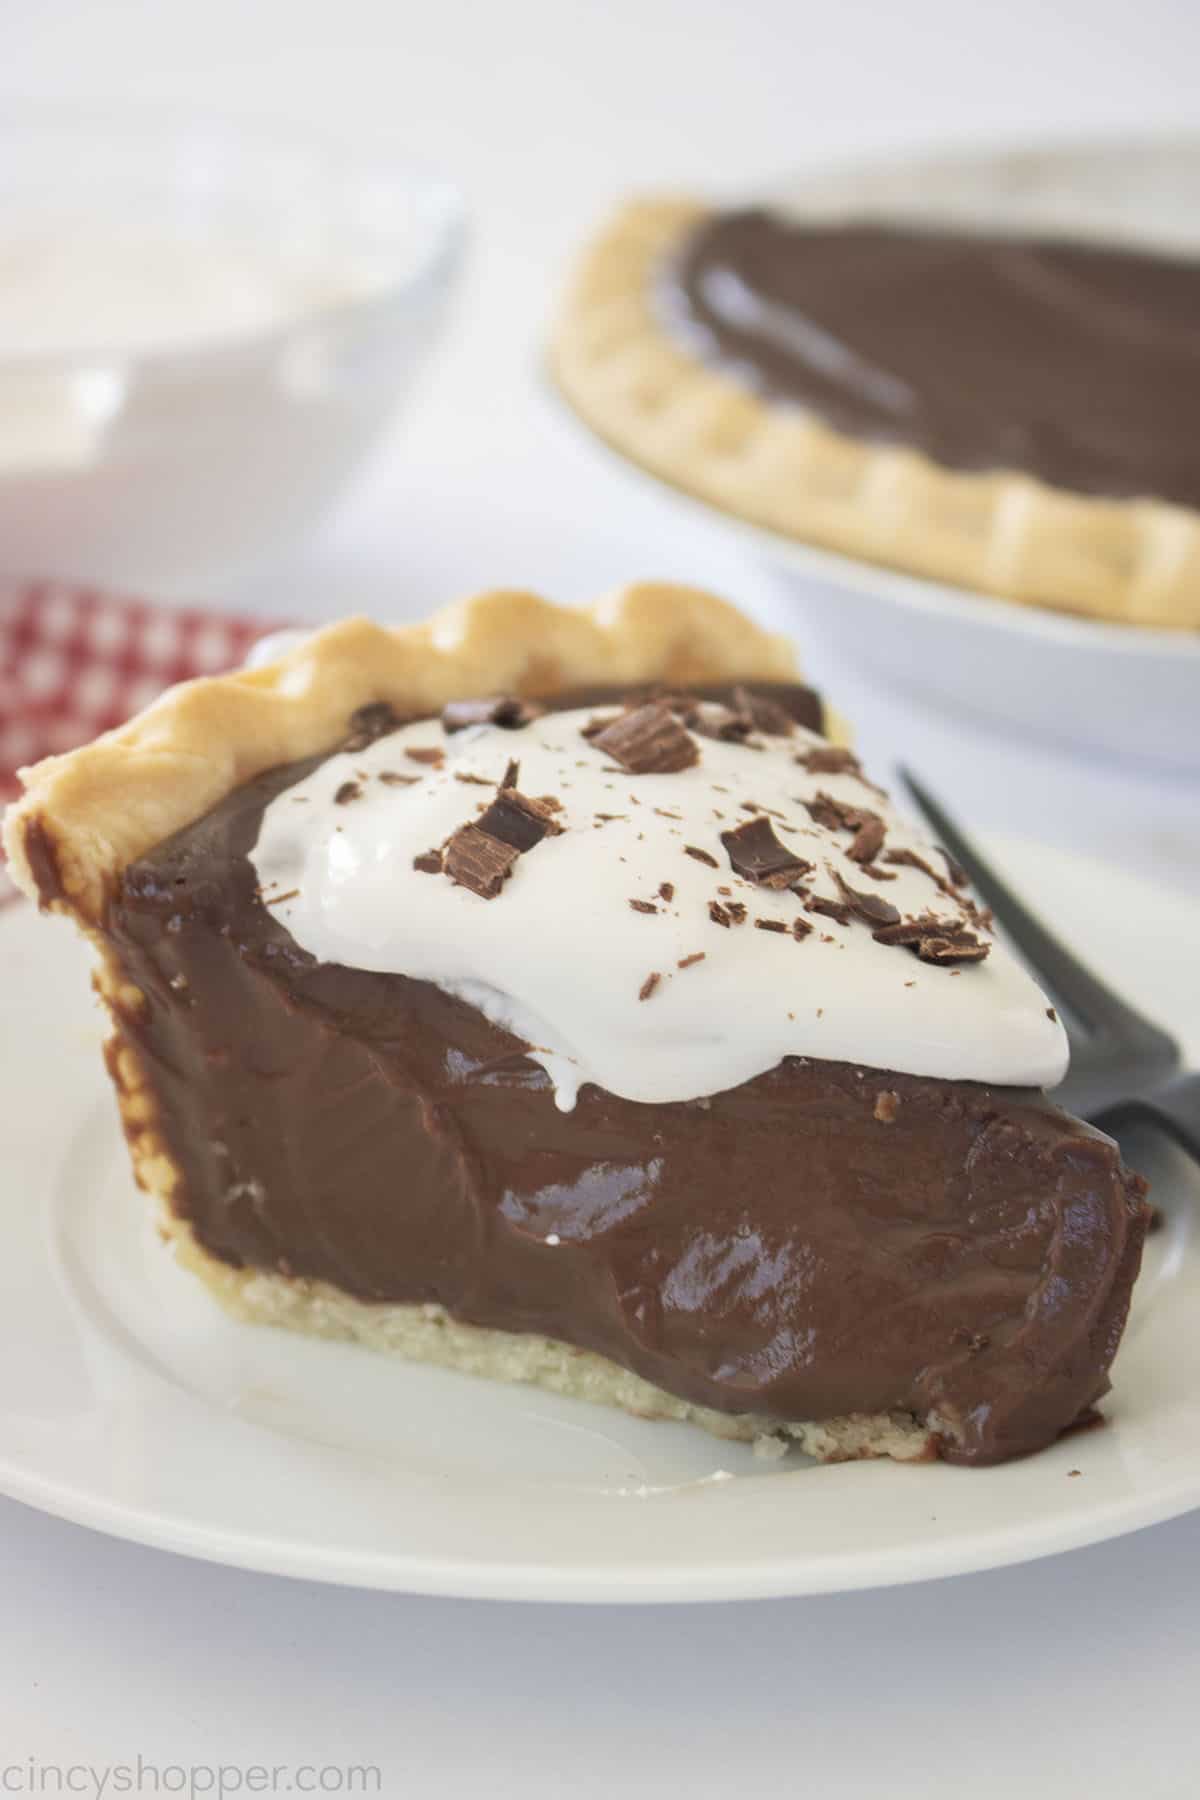 Slice of Chocolate Pudding Pie with whipped cream and chocolate shavings.